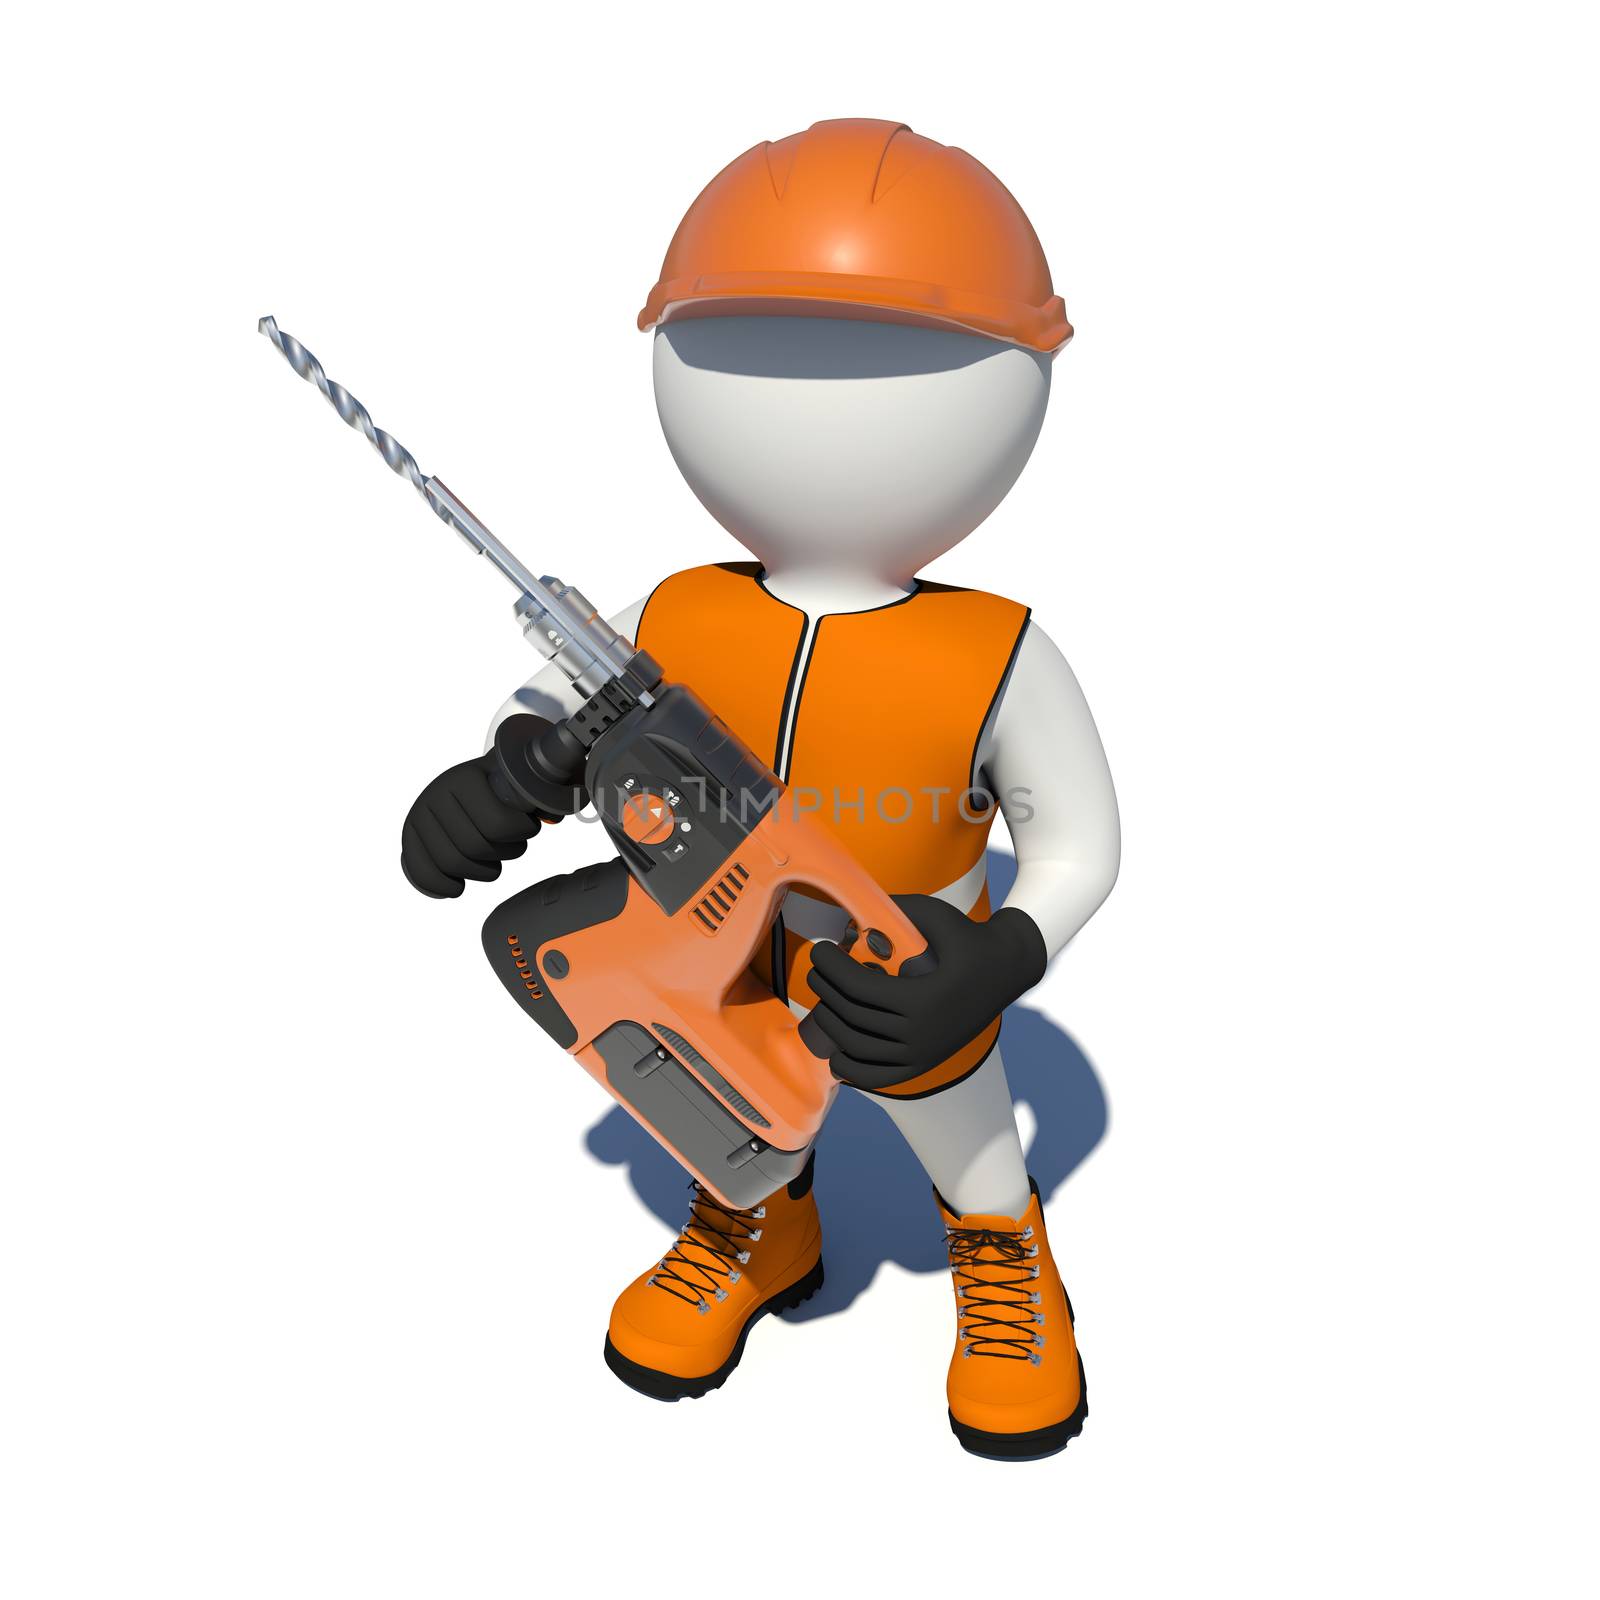 Worker in vest, shoes and helmet holding electric perforator. Top view. Isolated render on white background